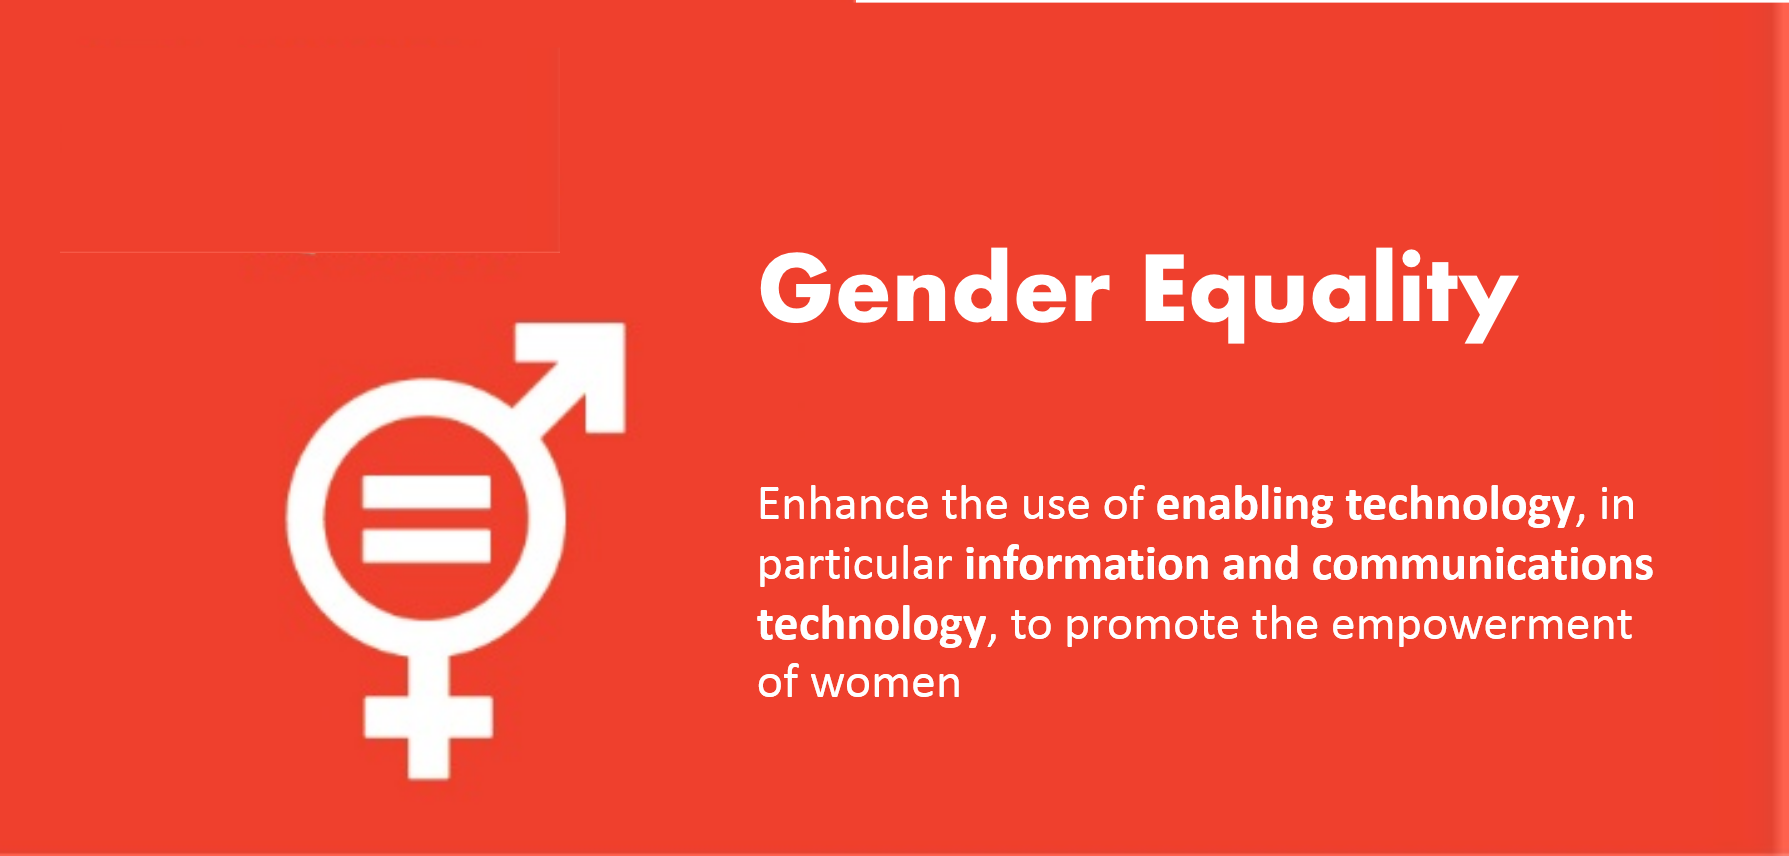 What Must Change For More Gender Equality Online